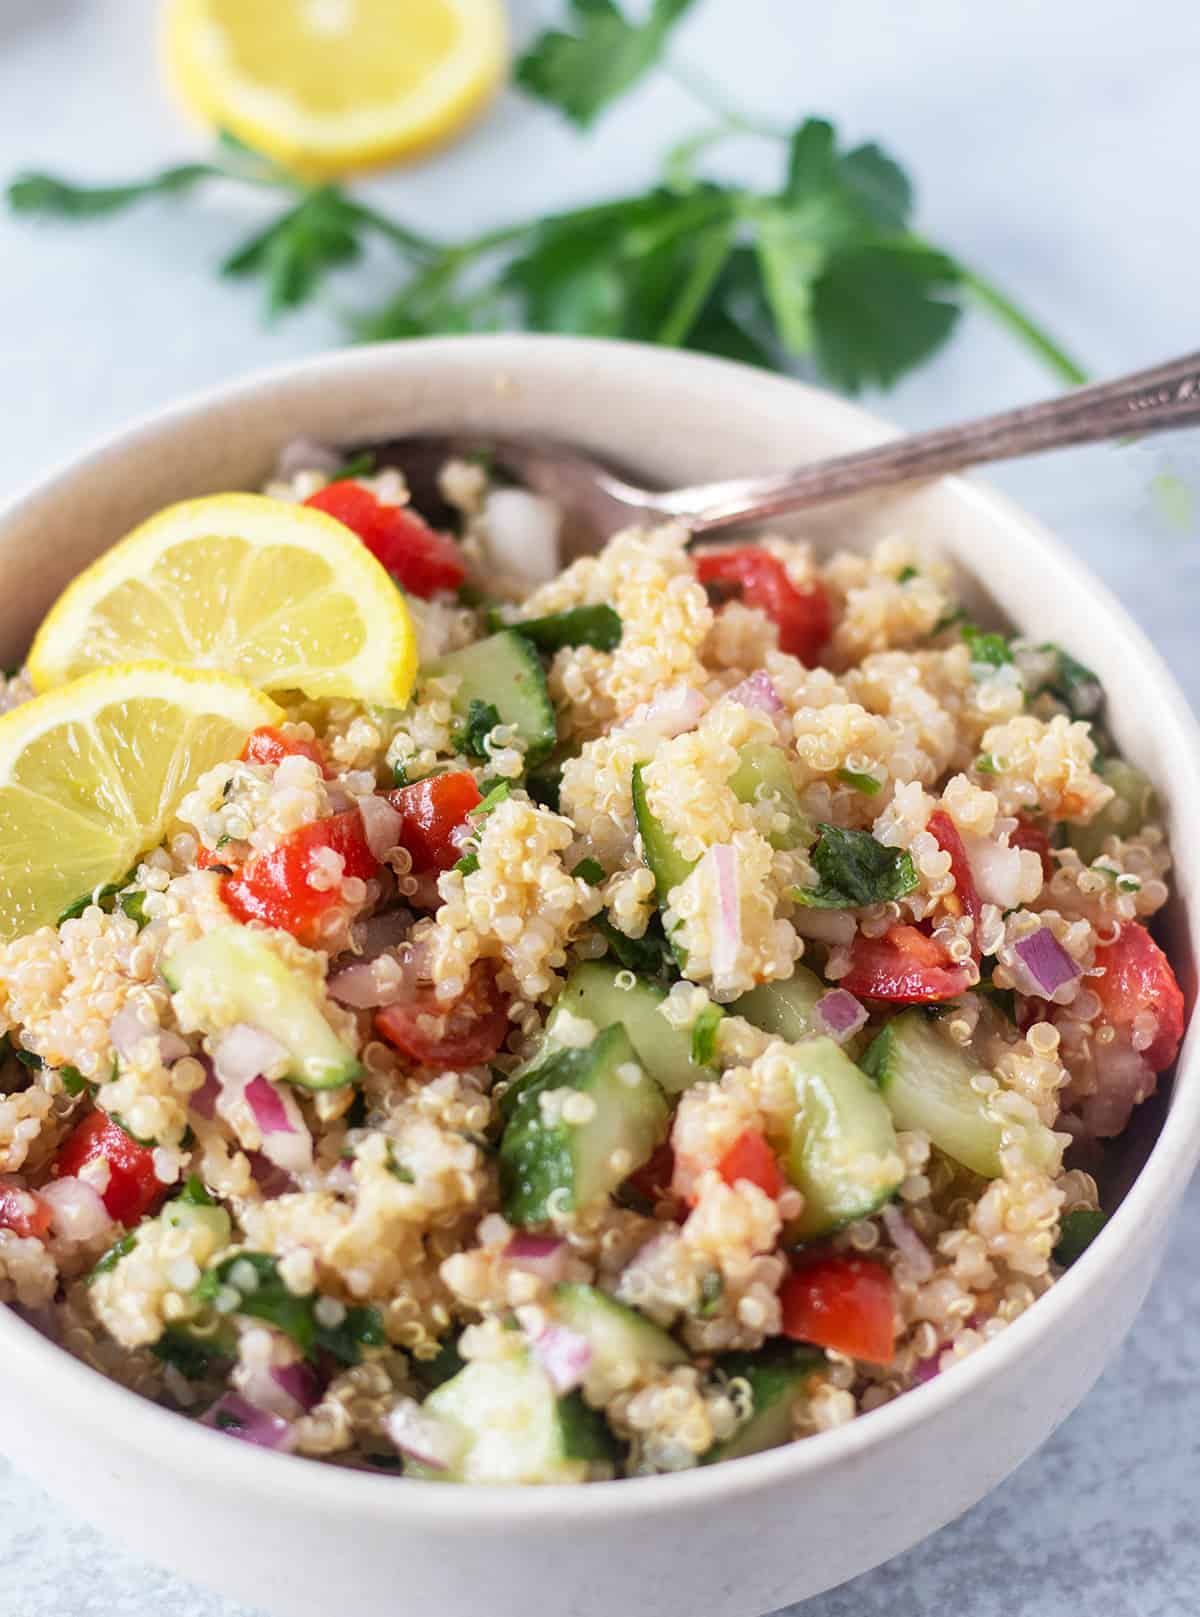 Quinoa tabbouleh in a white bowl with a silver spoon and garnished with lemon slices.